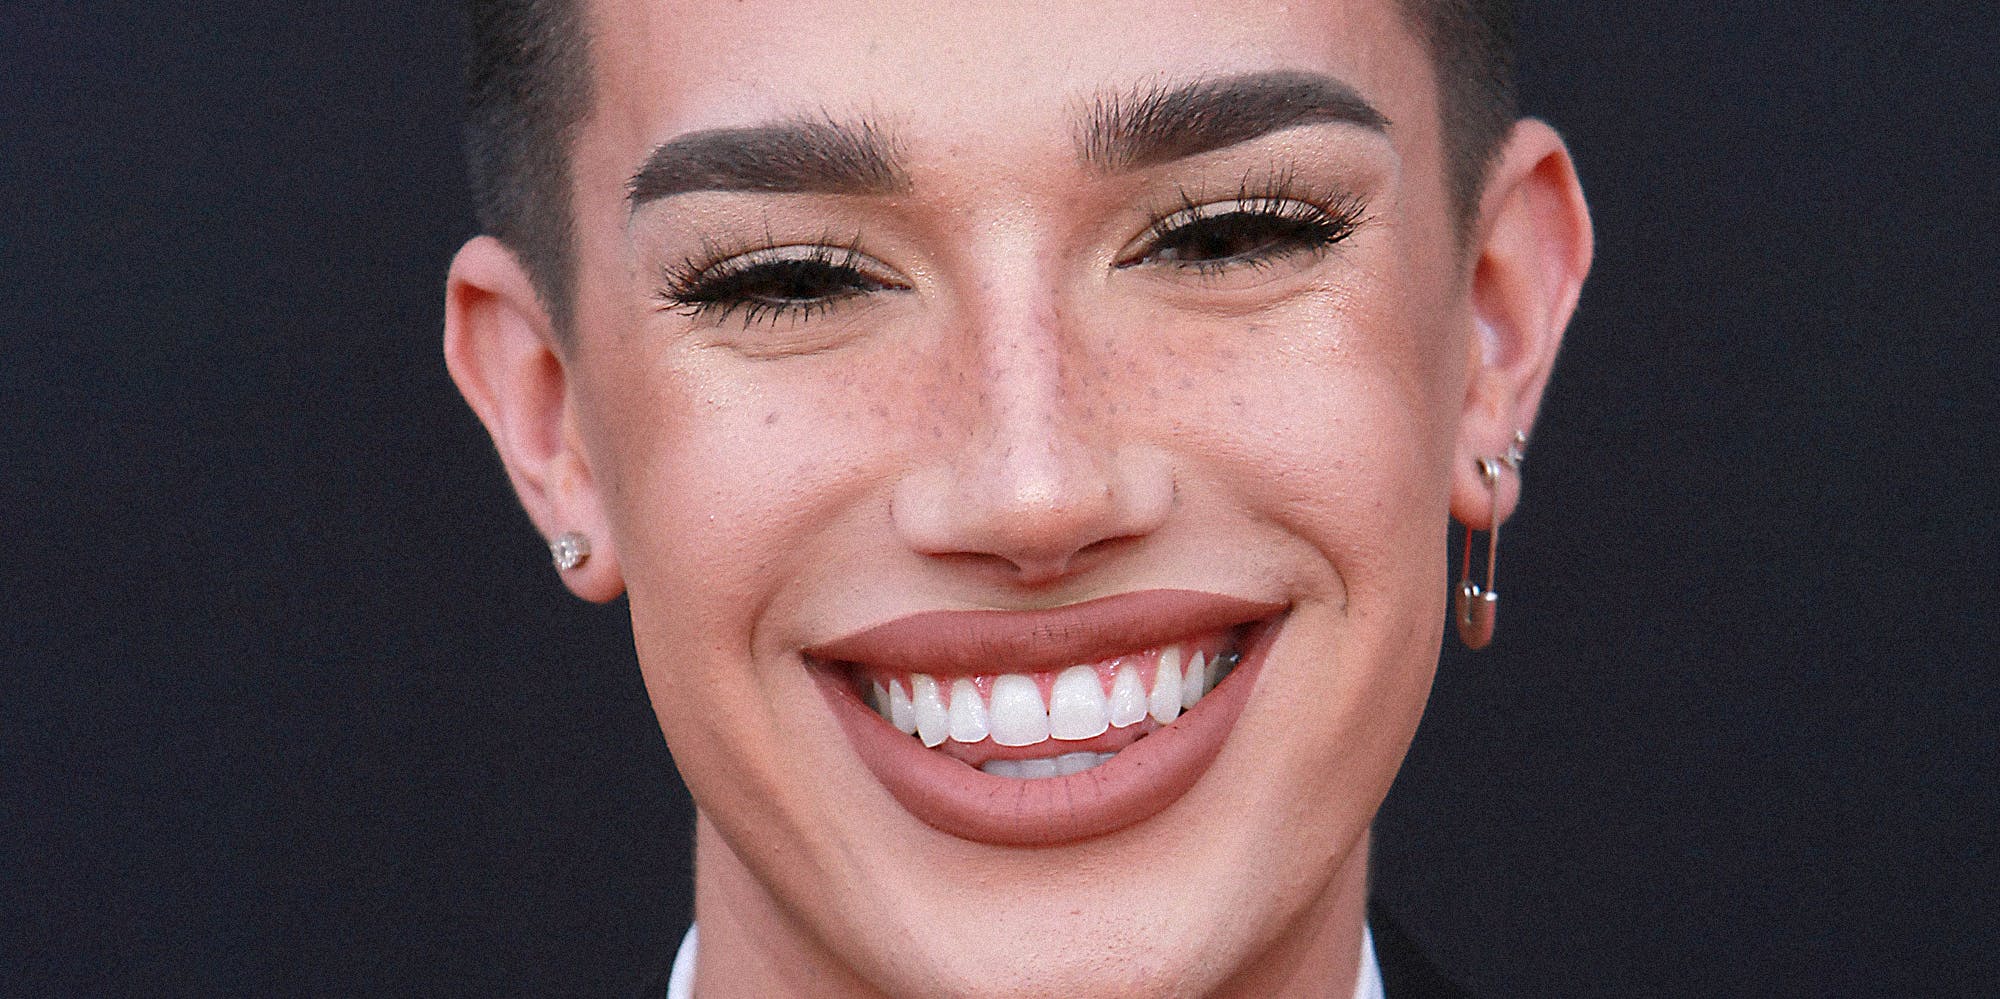 James Charles Faces Grooming Accusations After Minor Posts Messages